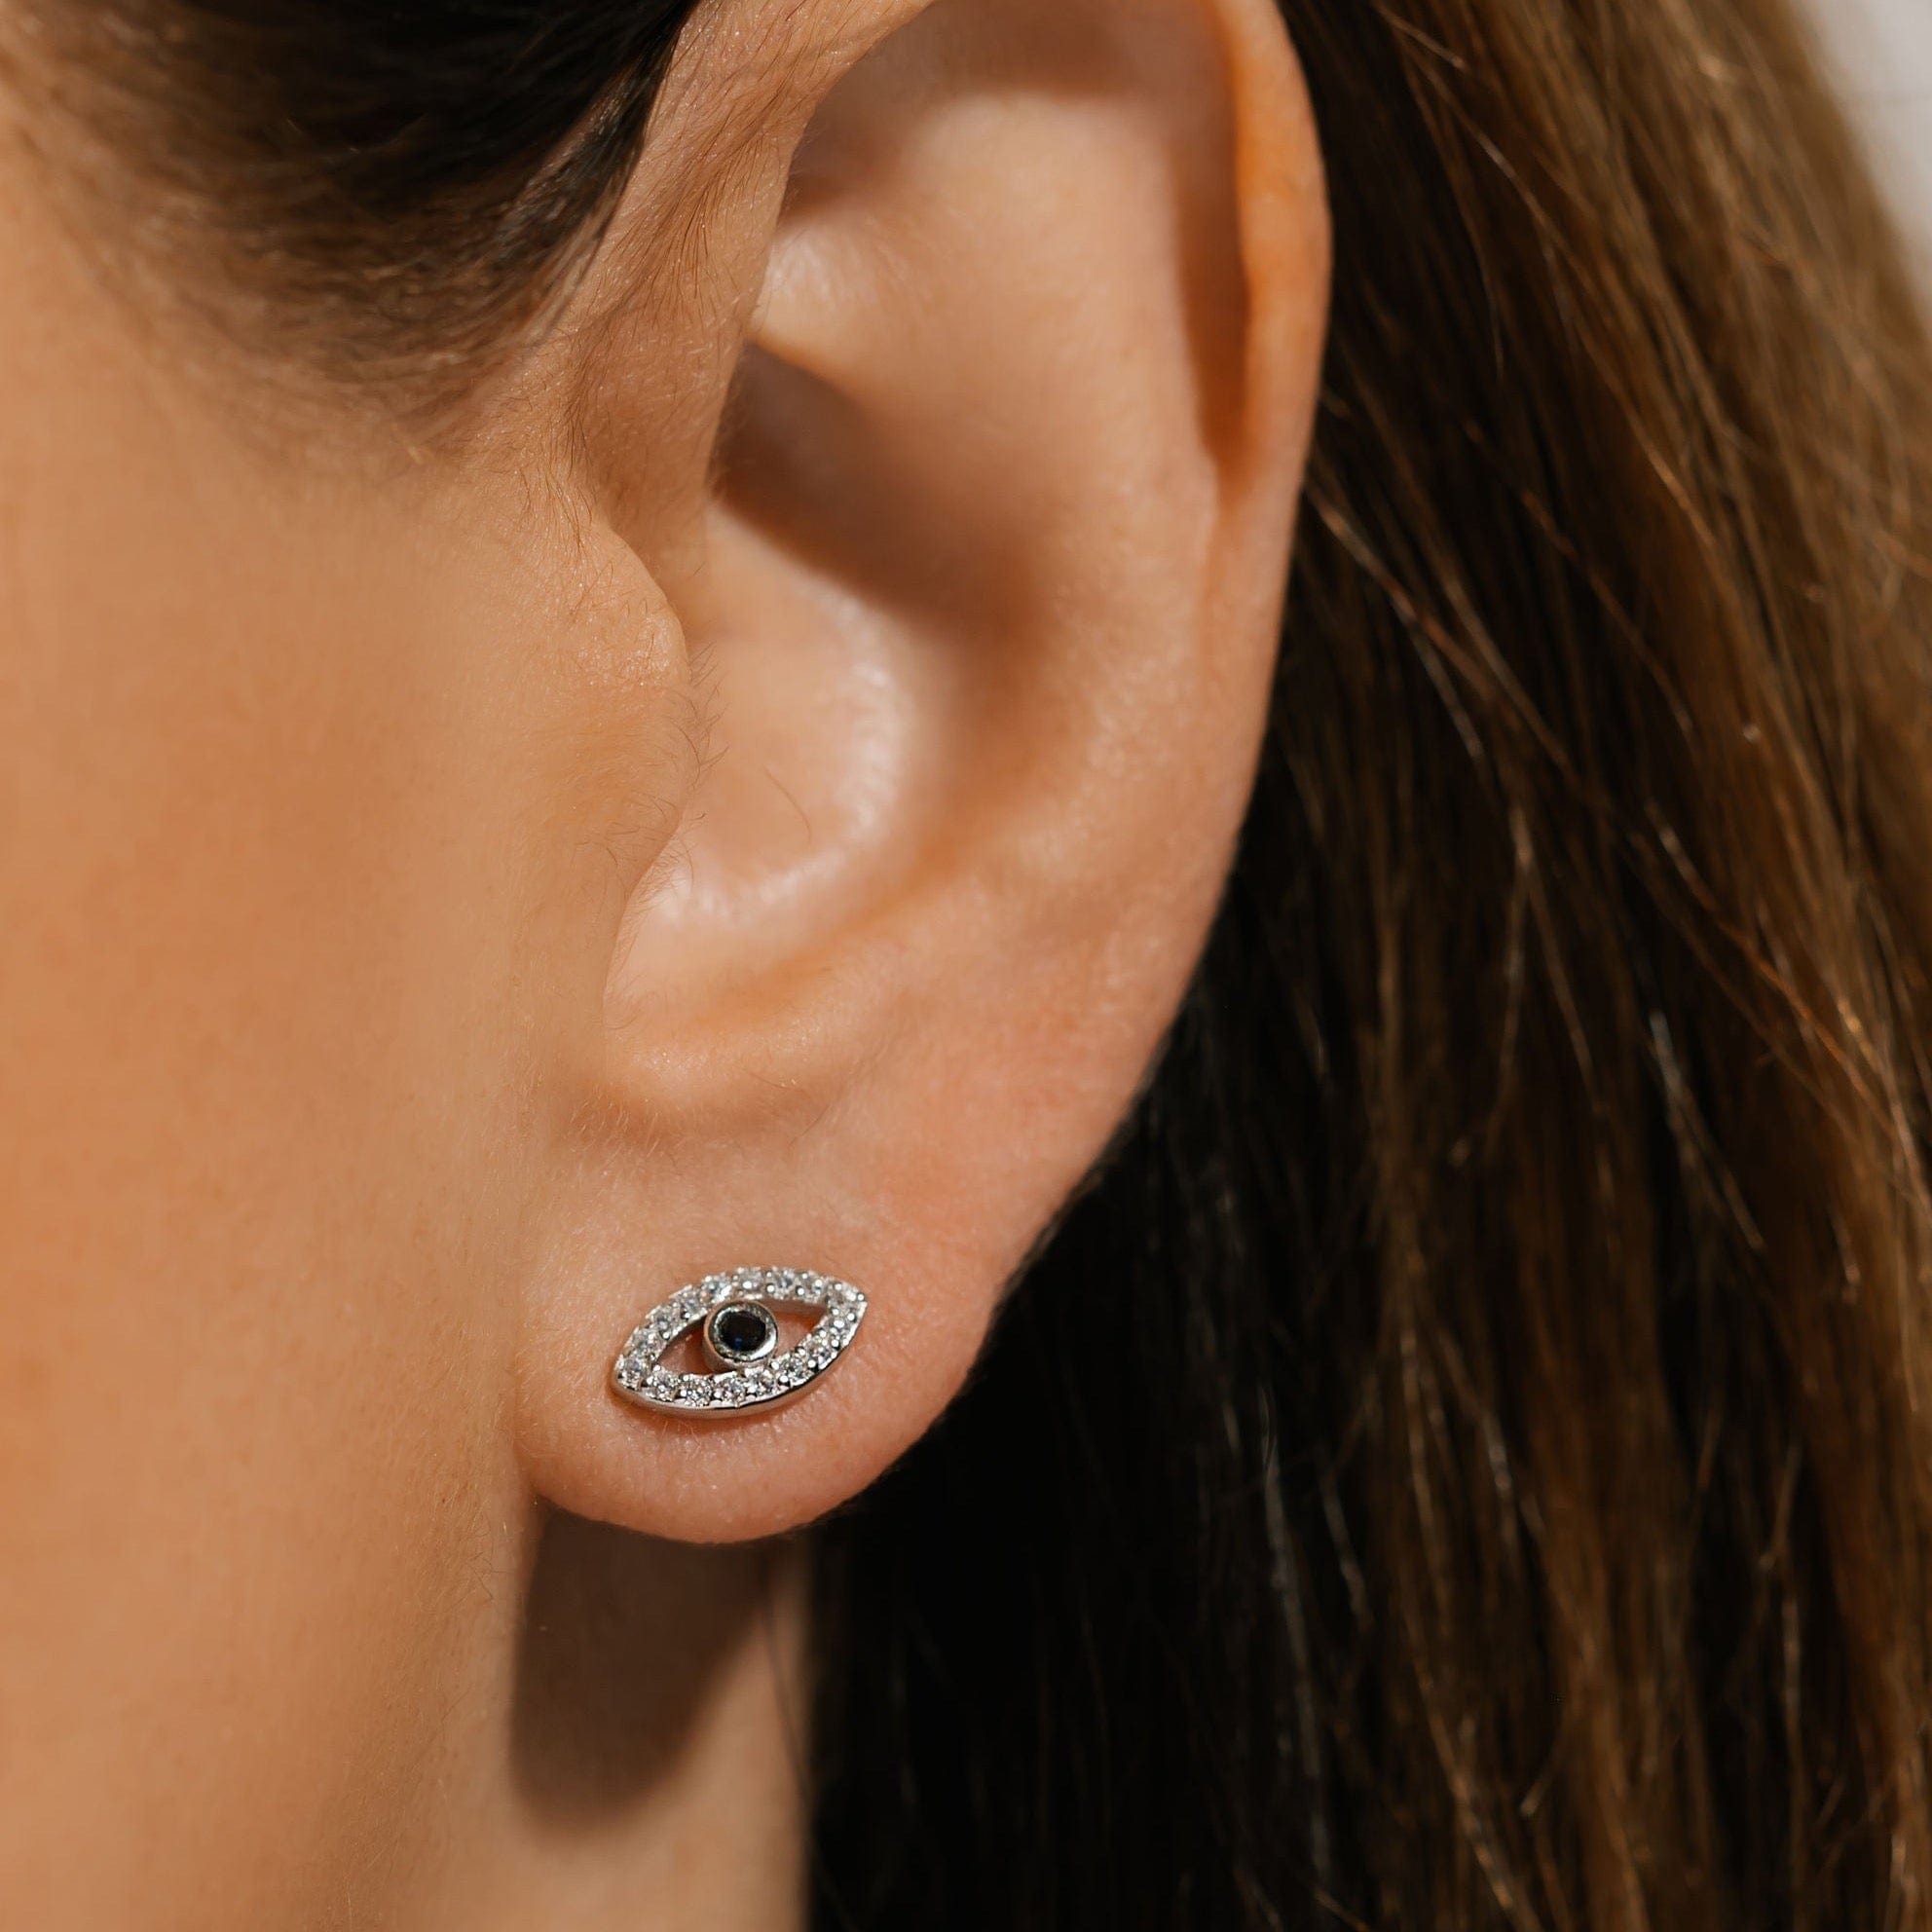 Sparkling crystal accents surround a stunning center sapphire as the sterling silver Evil Eye Cristallo Stud earring decorates the model's ear. 